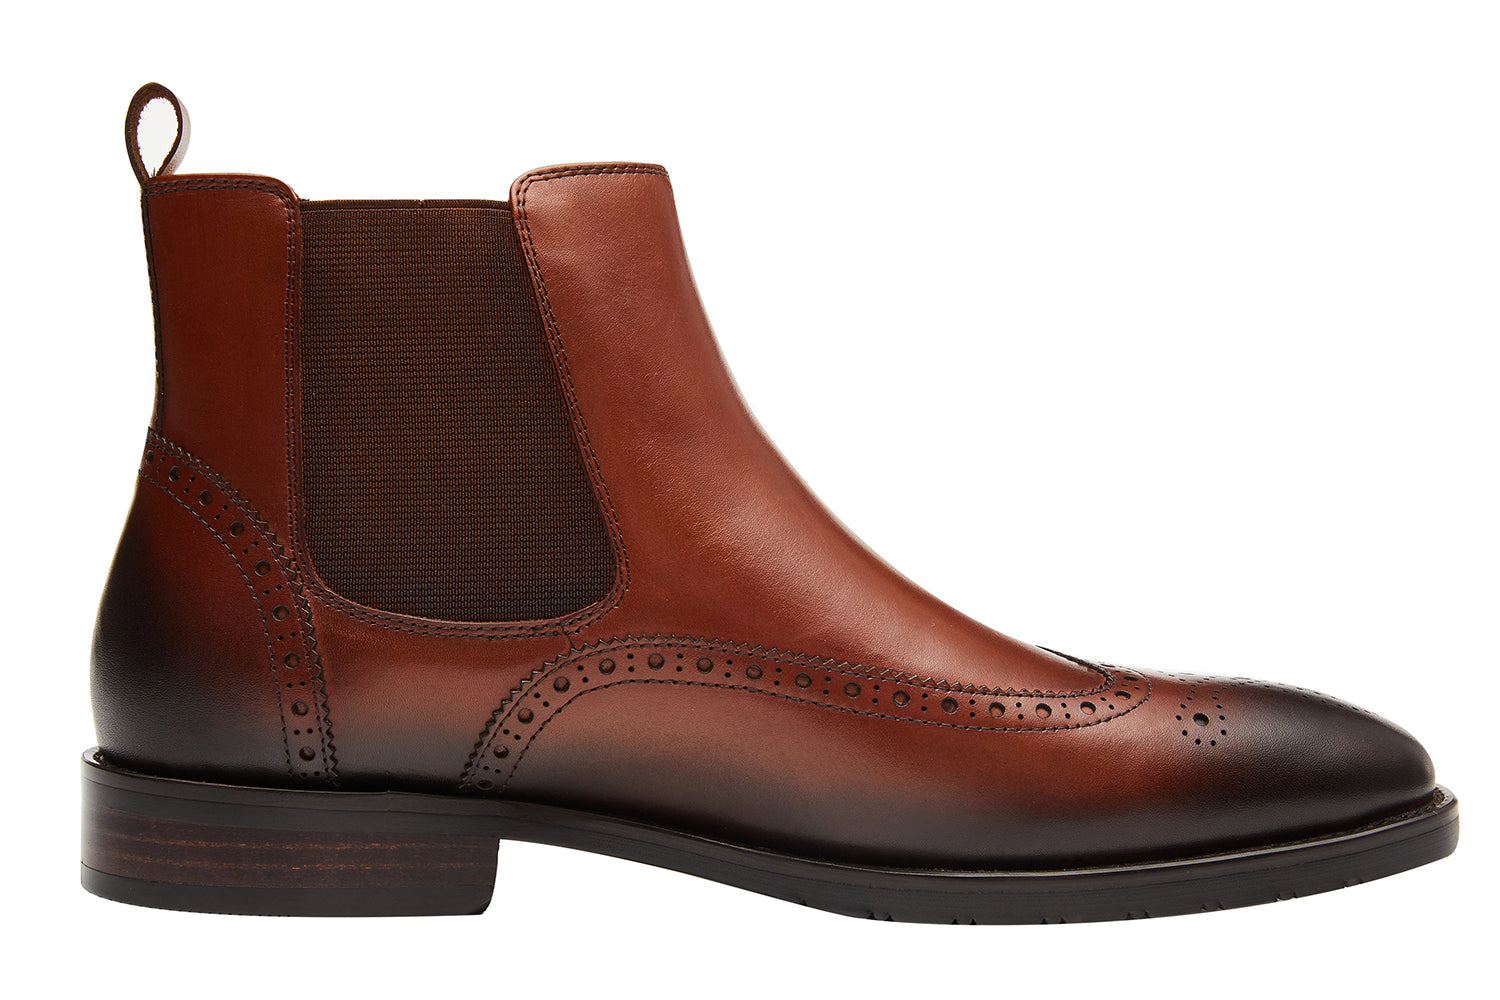 Men's Leather Fashion Classic Chelsea Boots